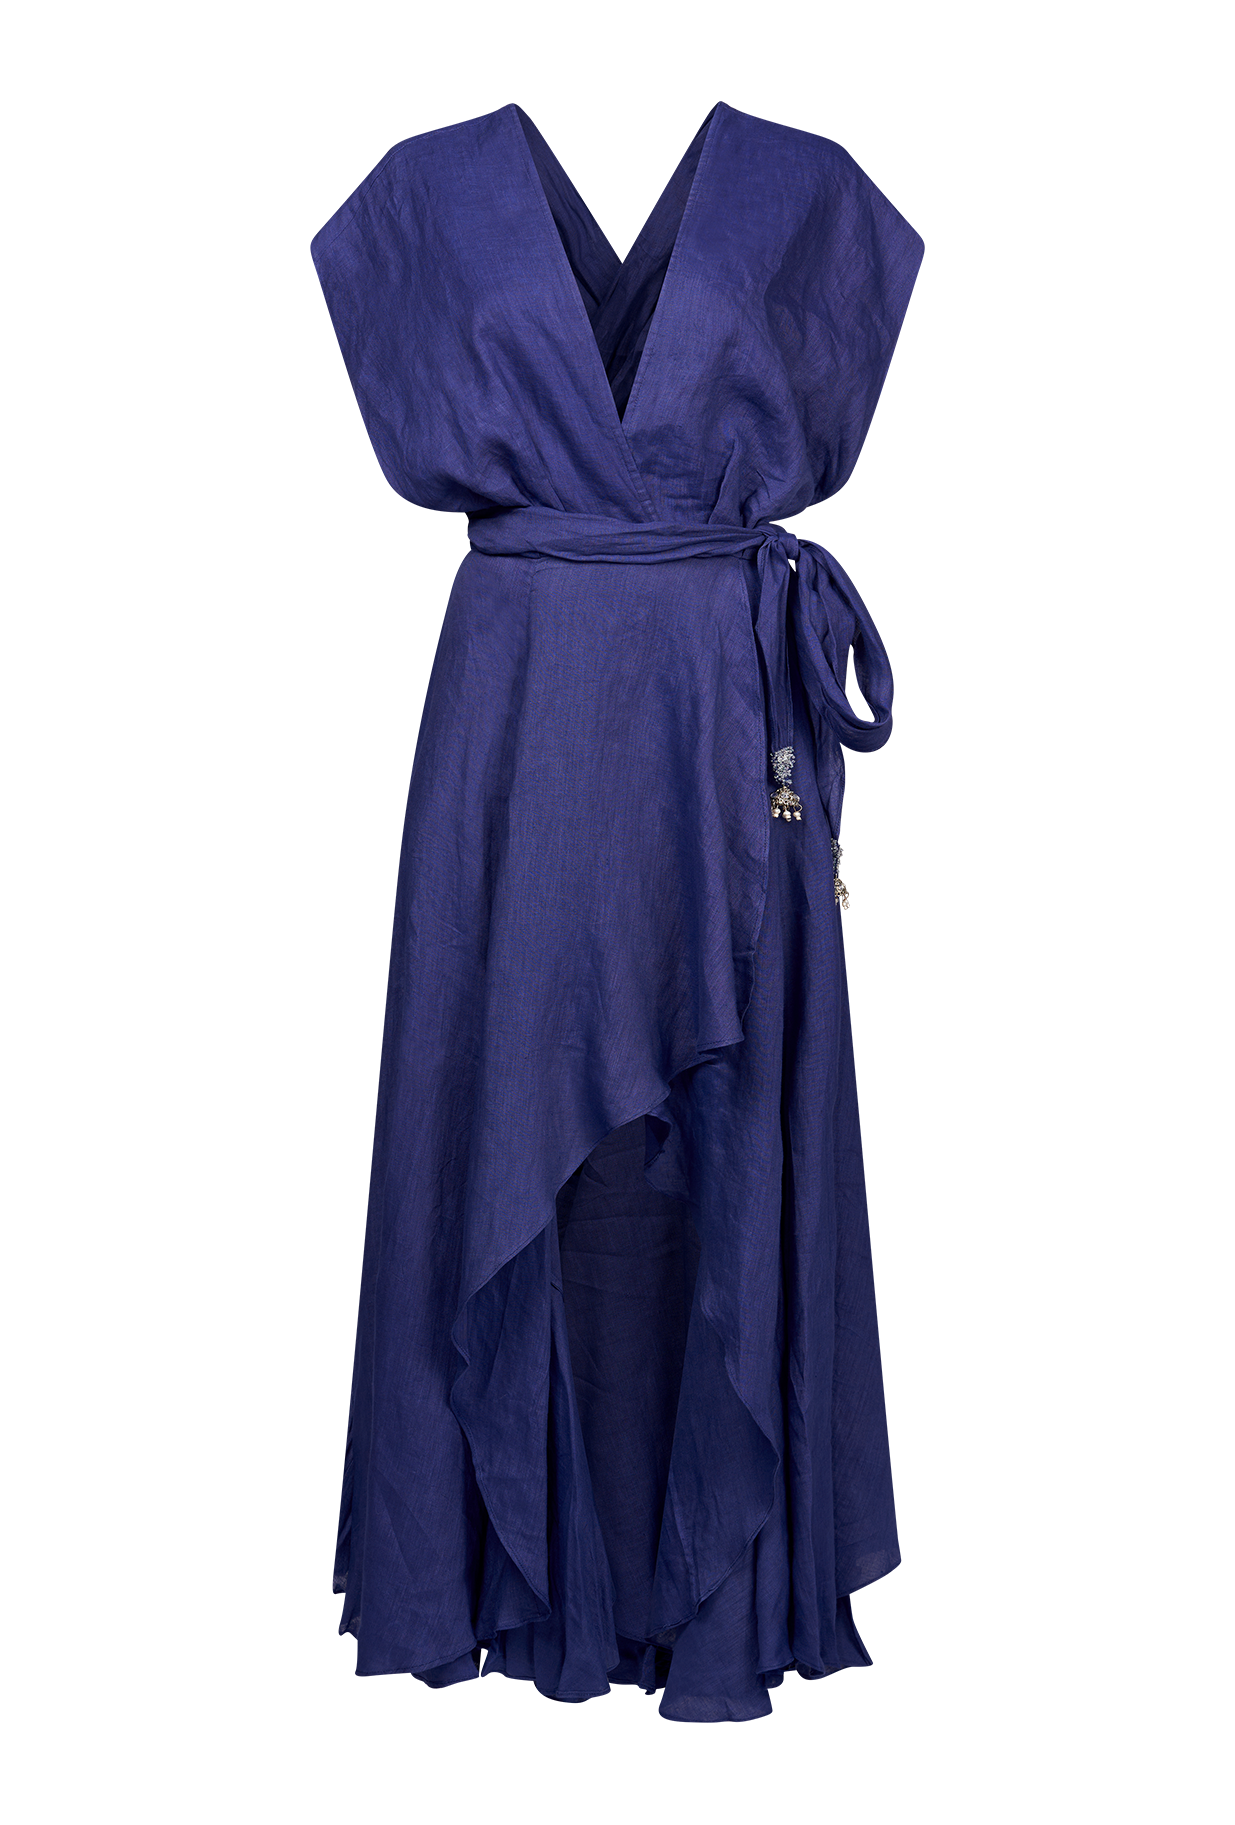 Navy linen dress with wrap front and bodice with V neck that wraps over the shoulders and crosses at the back and around the waist